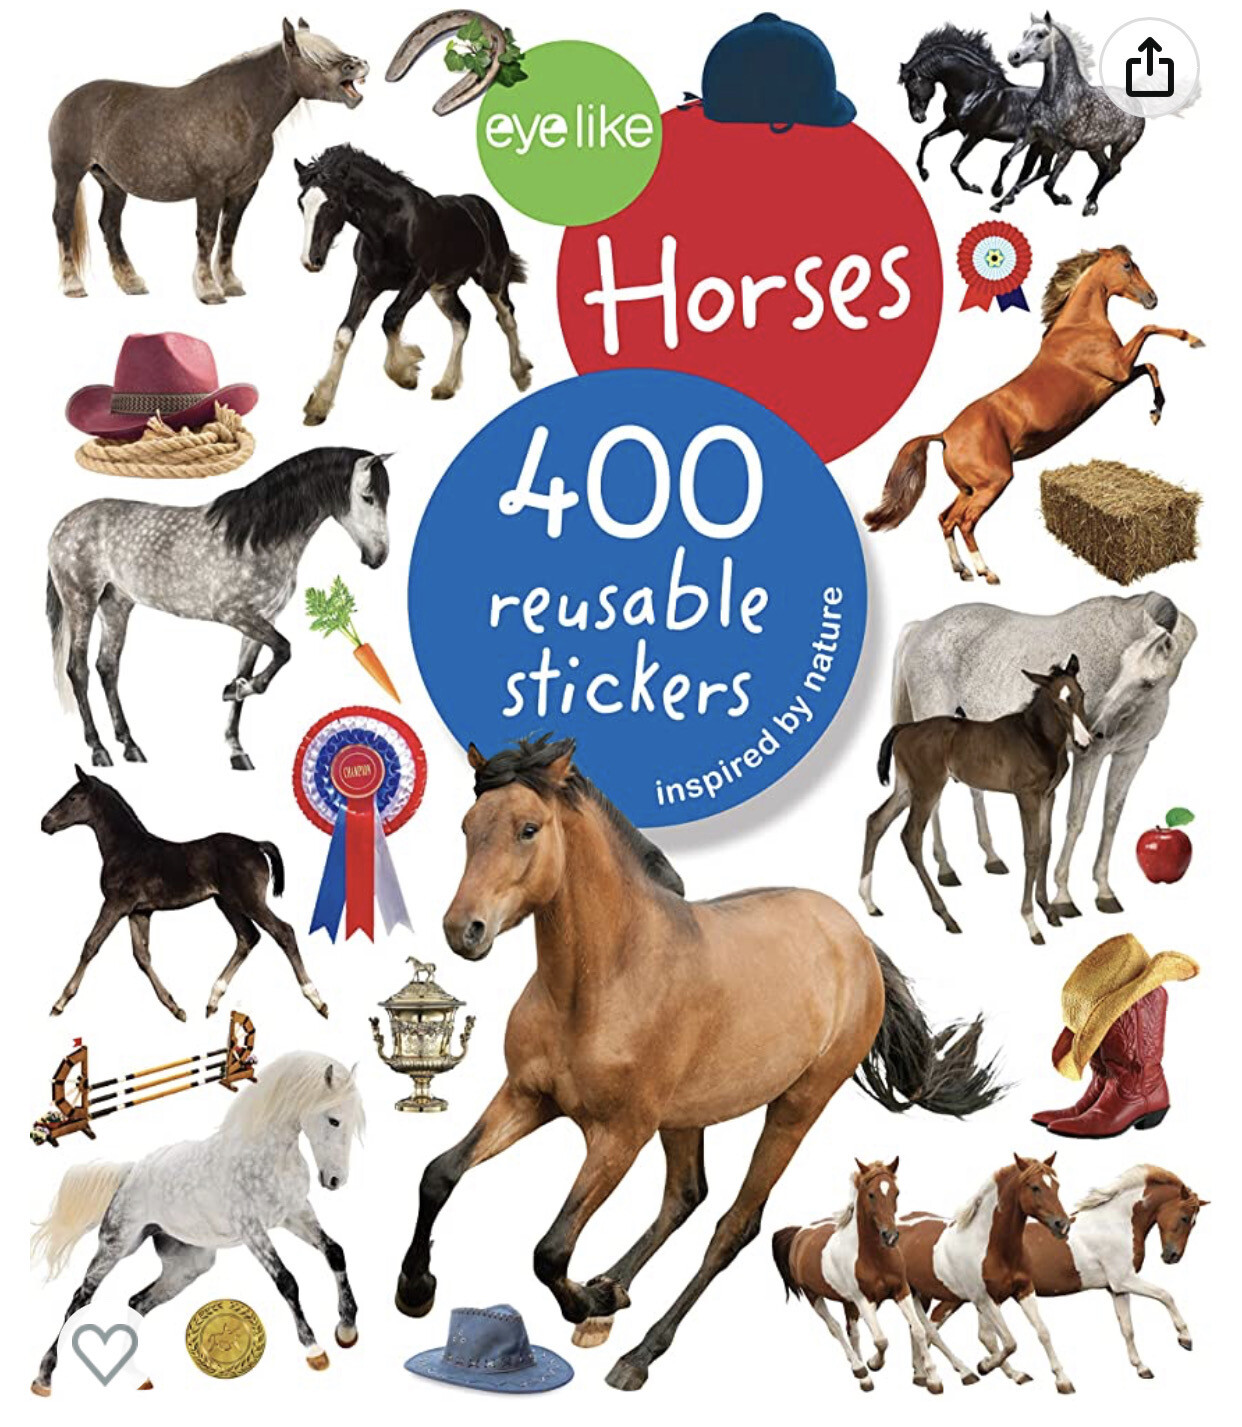 Horses 400 Reusable Stickers